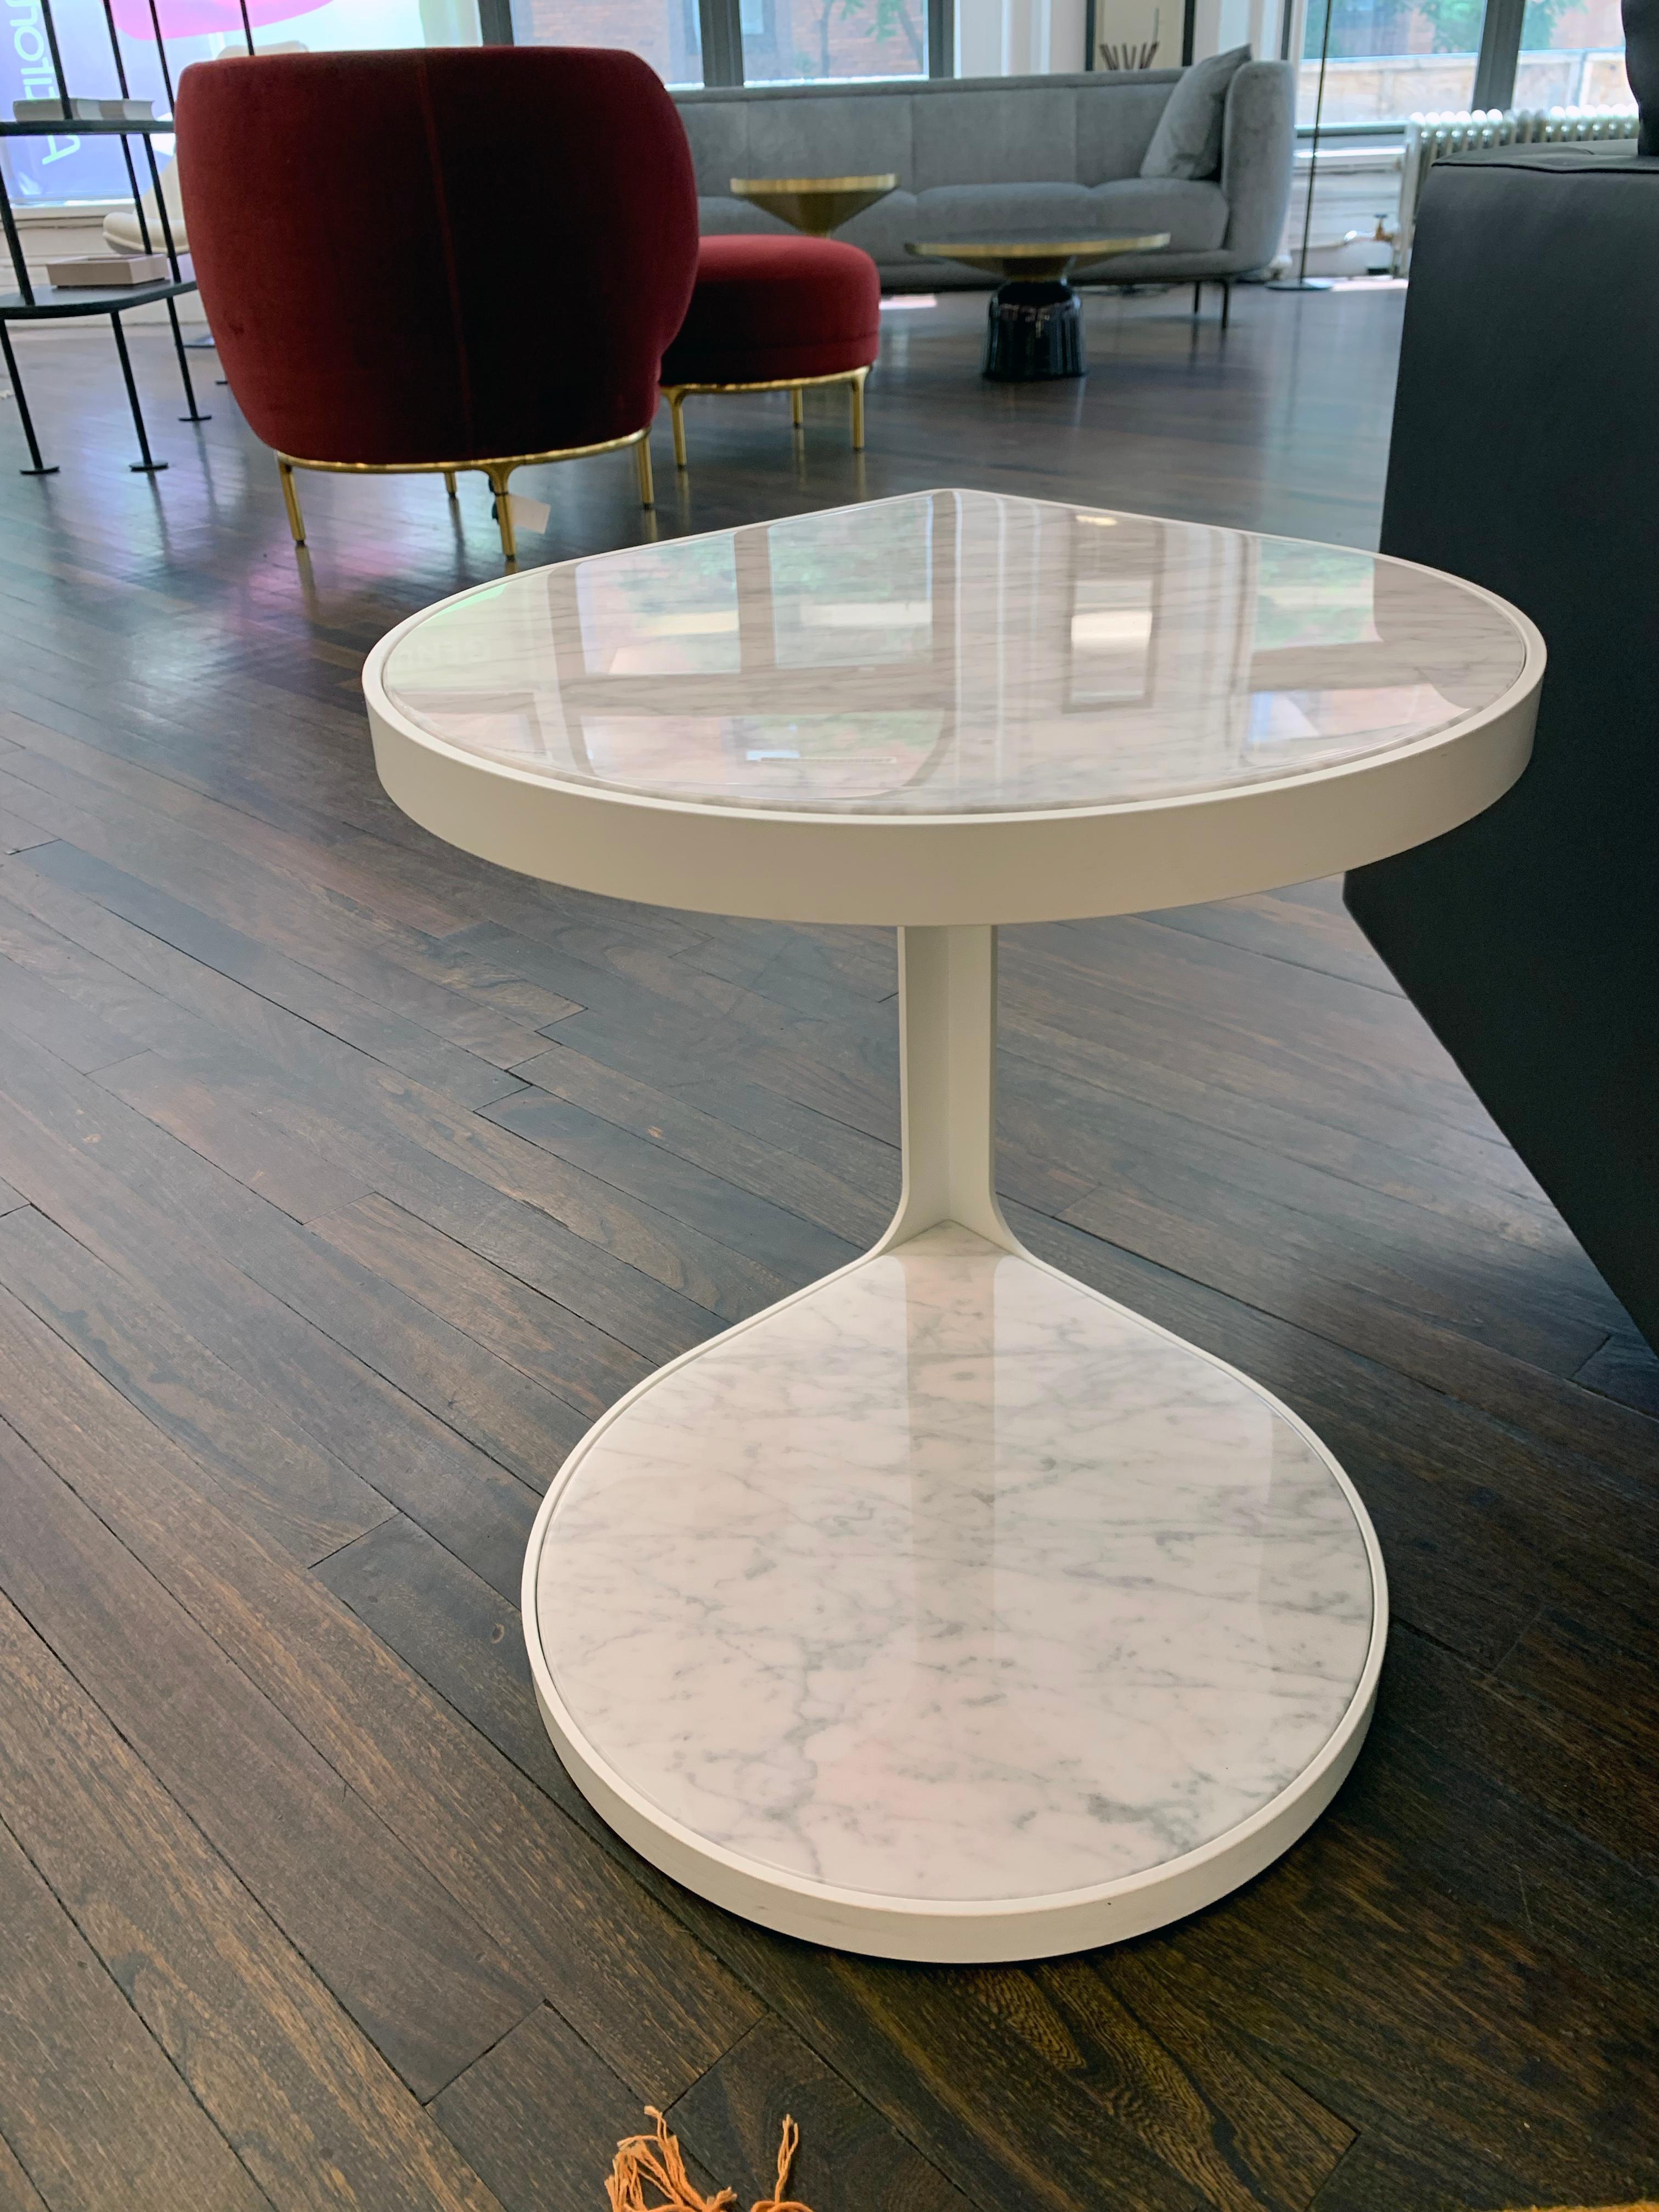 Nature’s shapes represent a major source of inspiration for designer Gordon Guillaumier. The top of the Coot table was inspired by the simple geometry of a petal; it is a perfect motif for generating a variety of different models from one single